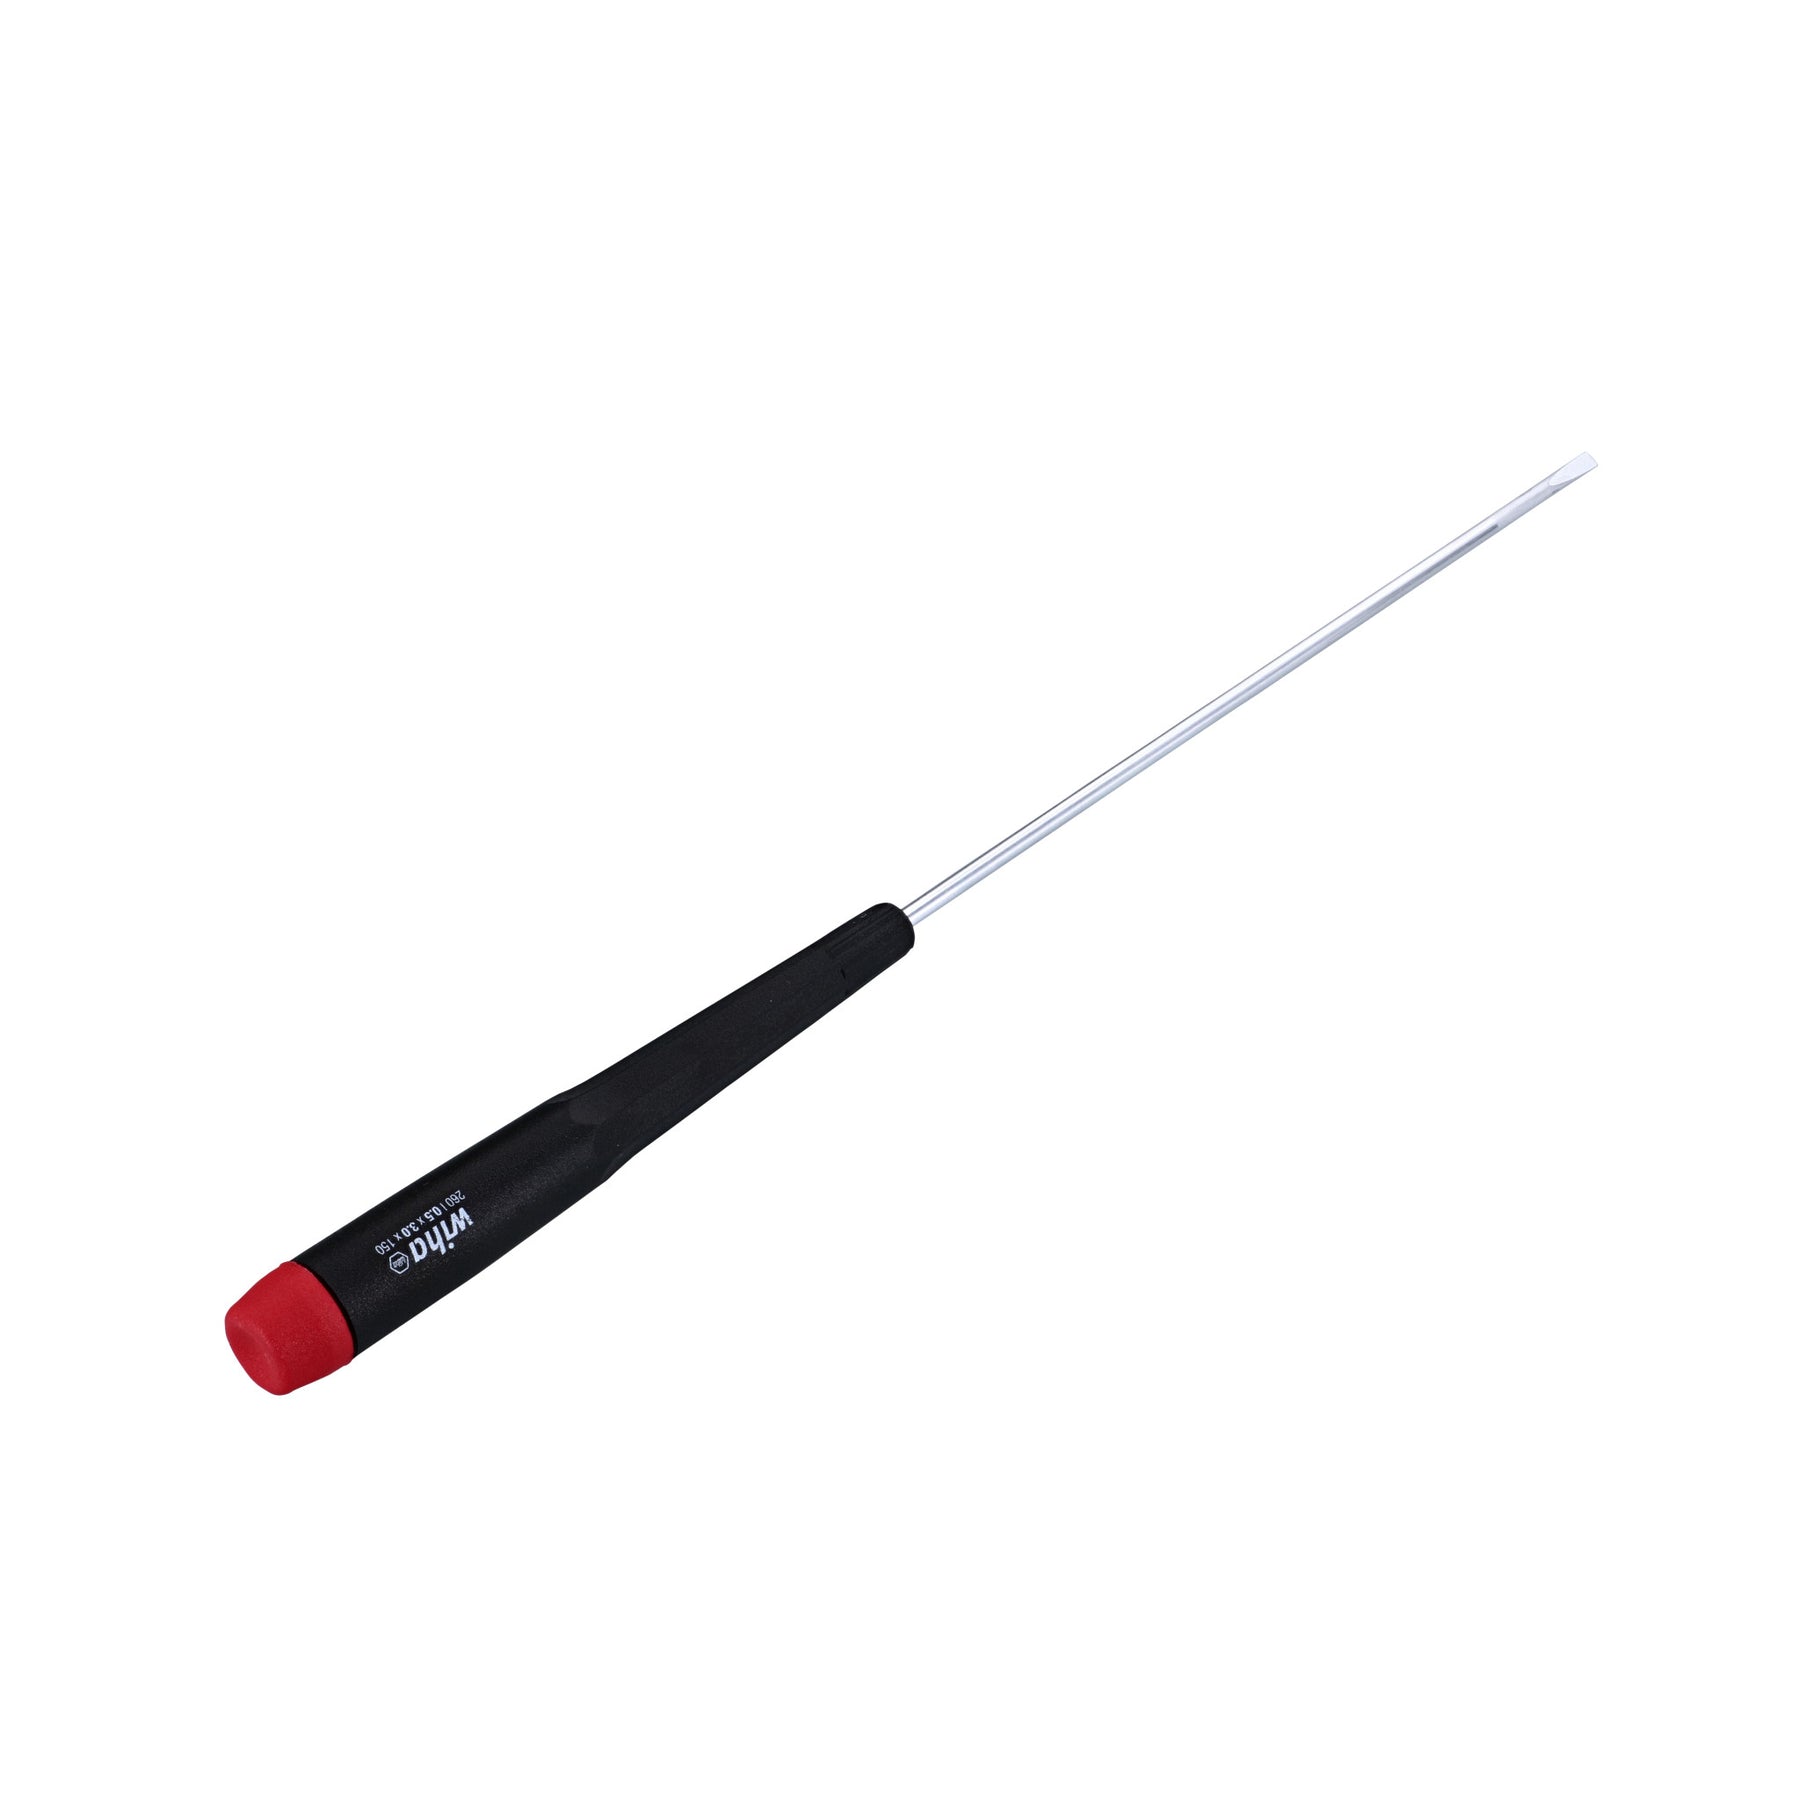 Precision Slotted Screwdriver 3.0mm x 150mm